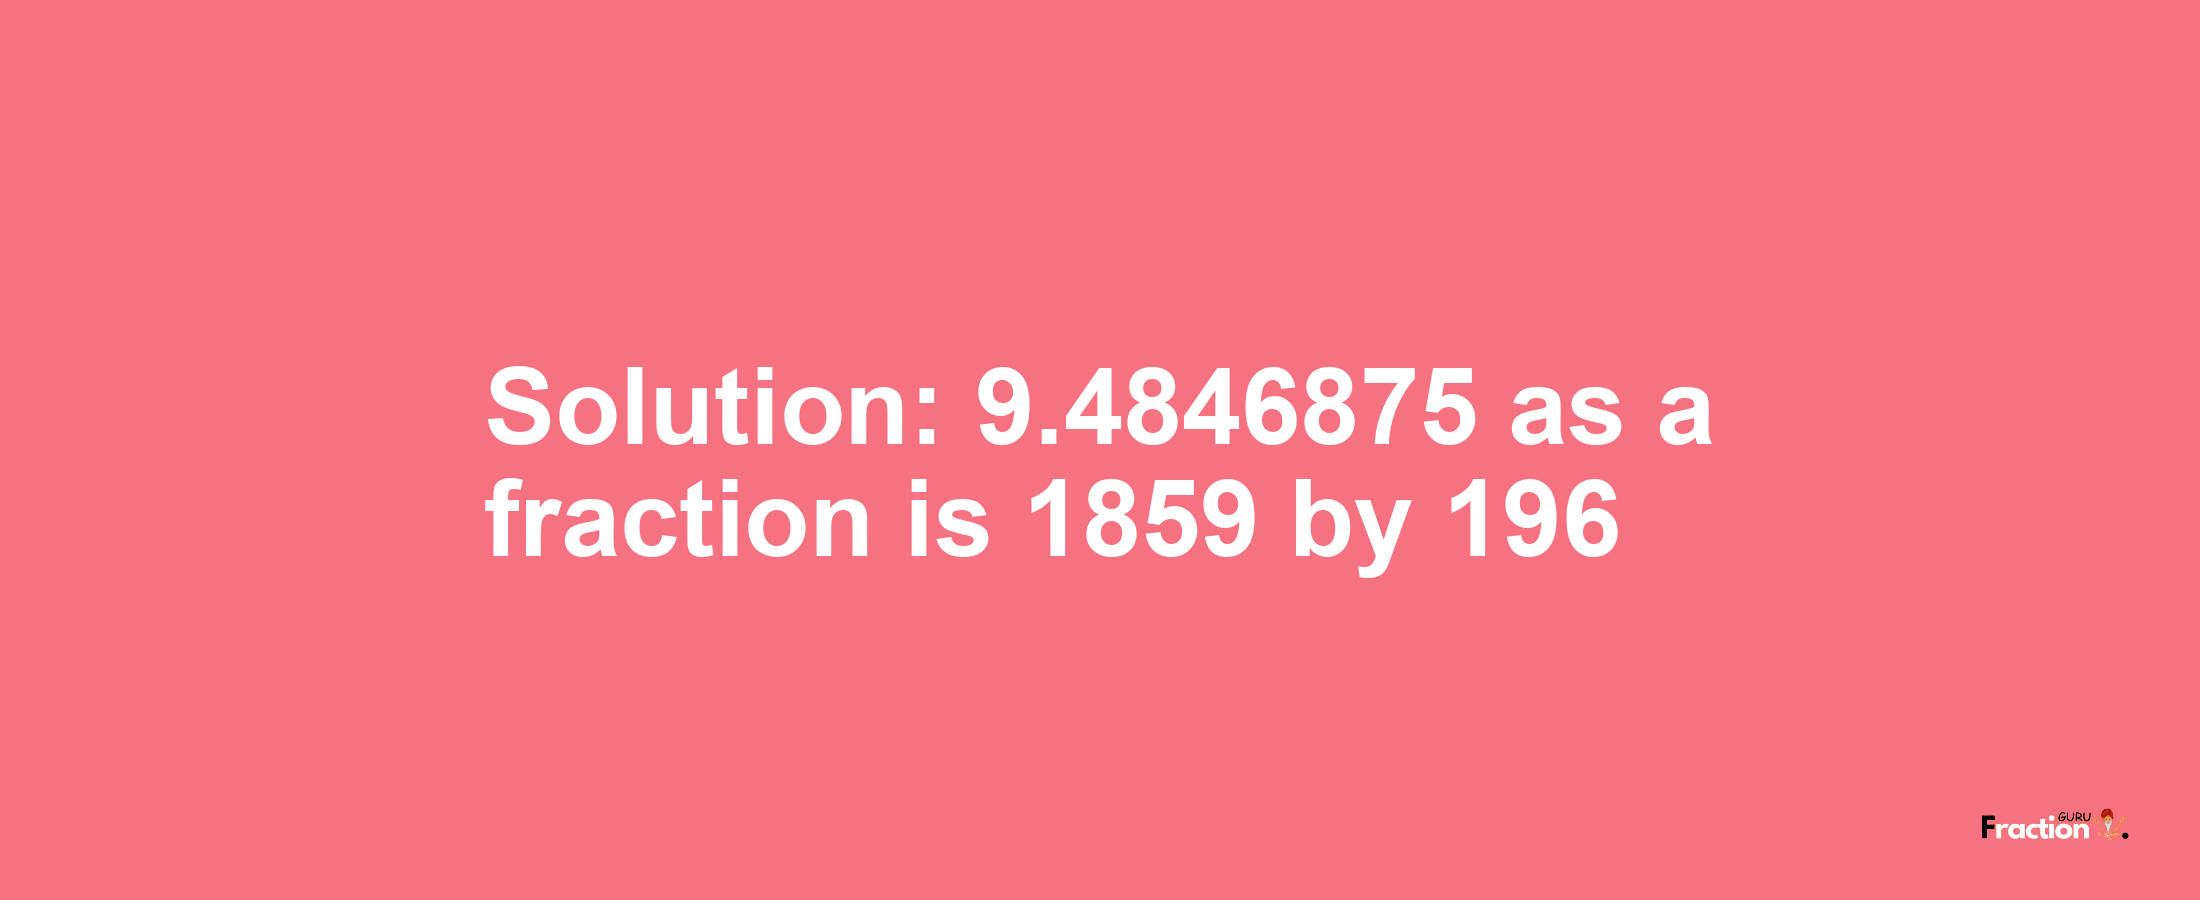 Solution:9.4846875 as a fraction is 1859/196